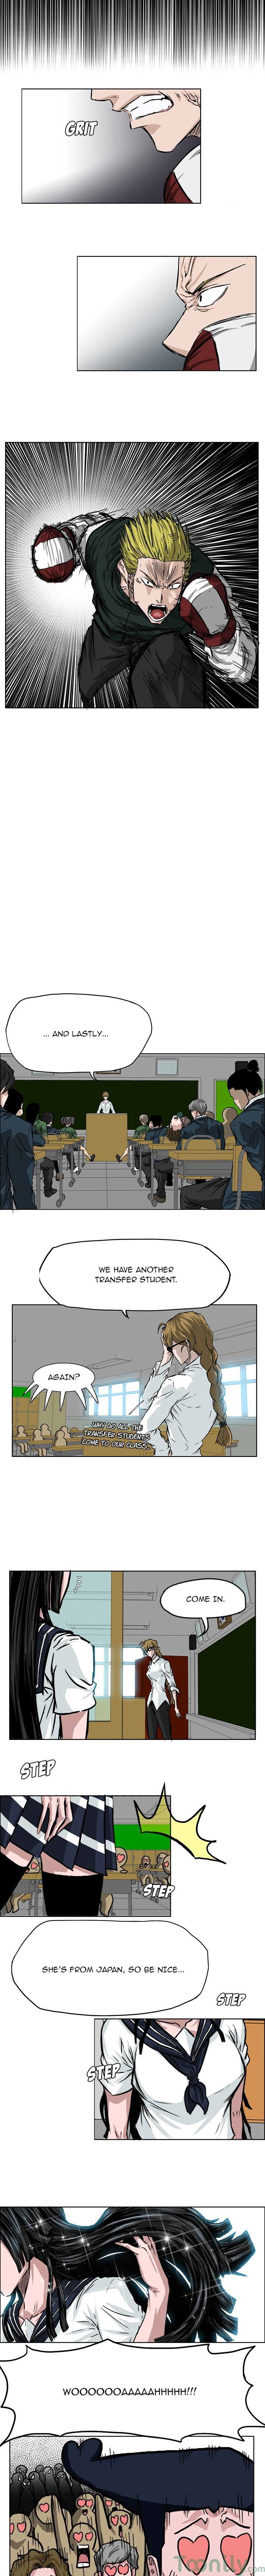 Boss in School Chapter 40 page 9